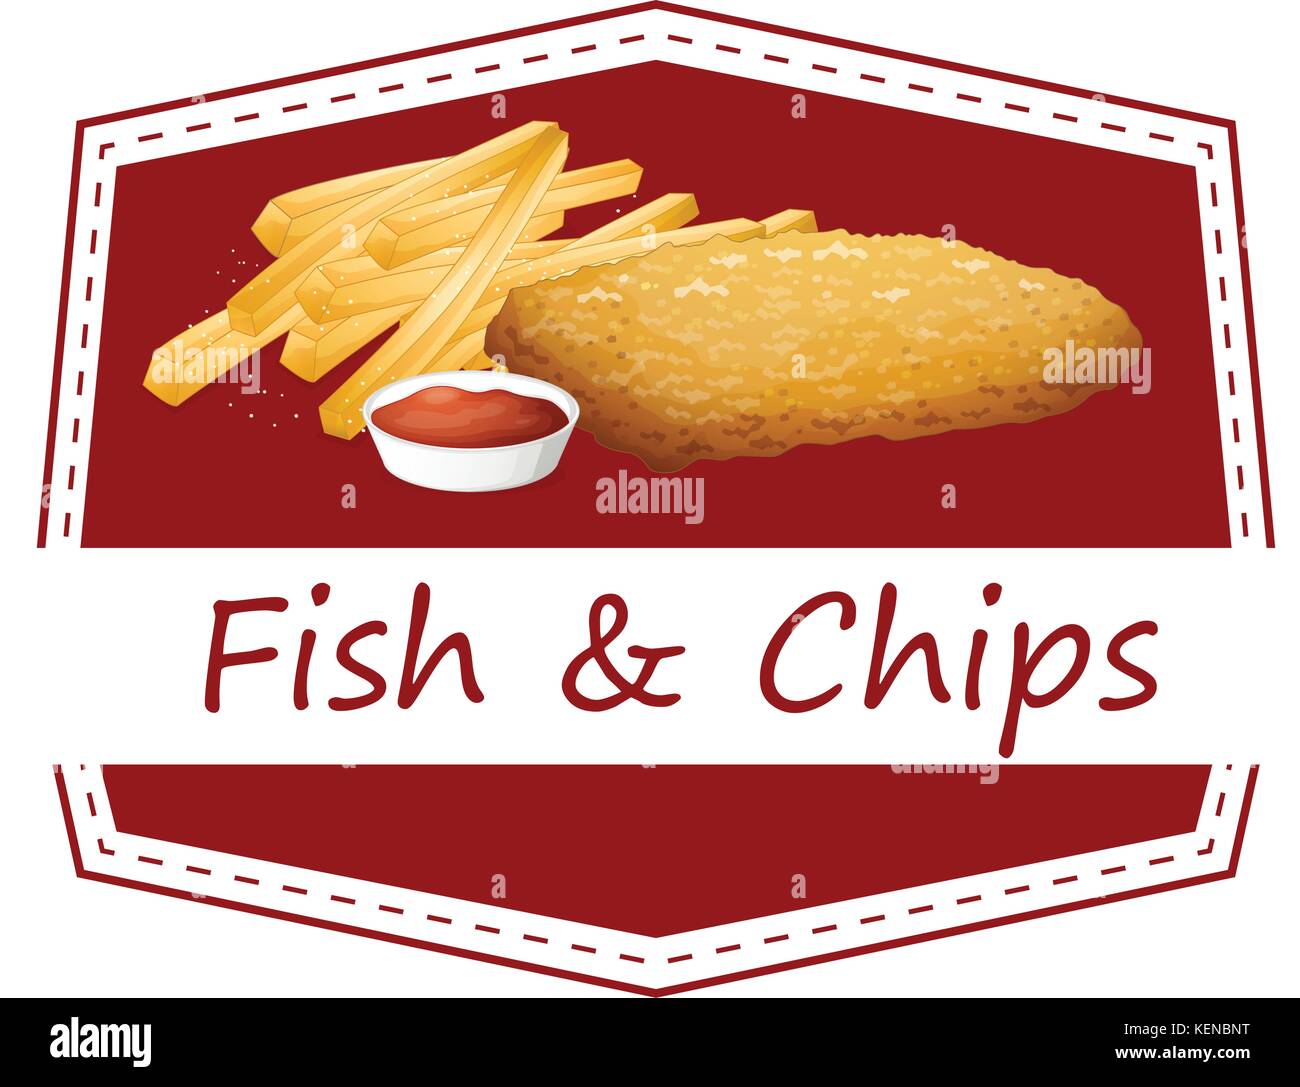 Illustration of fish and chips Stock Vector